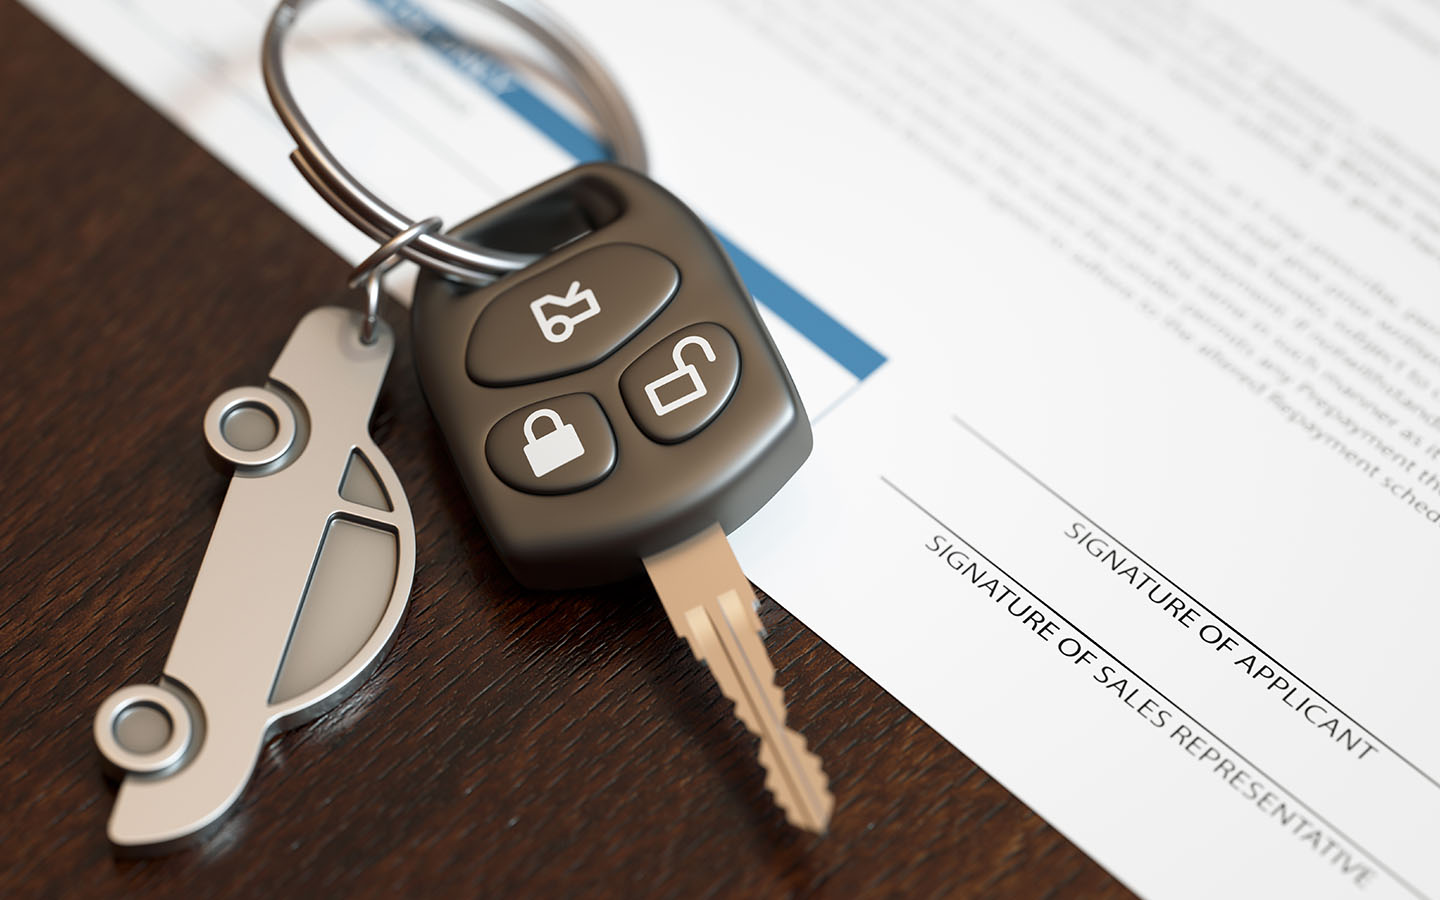 Enjoy the benefits of SME car loan in the UAE